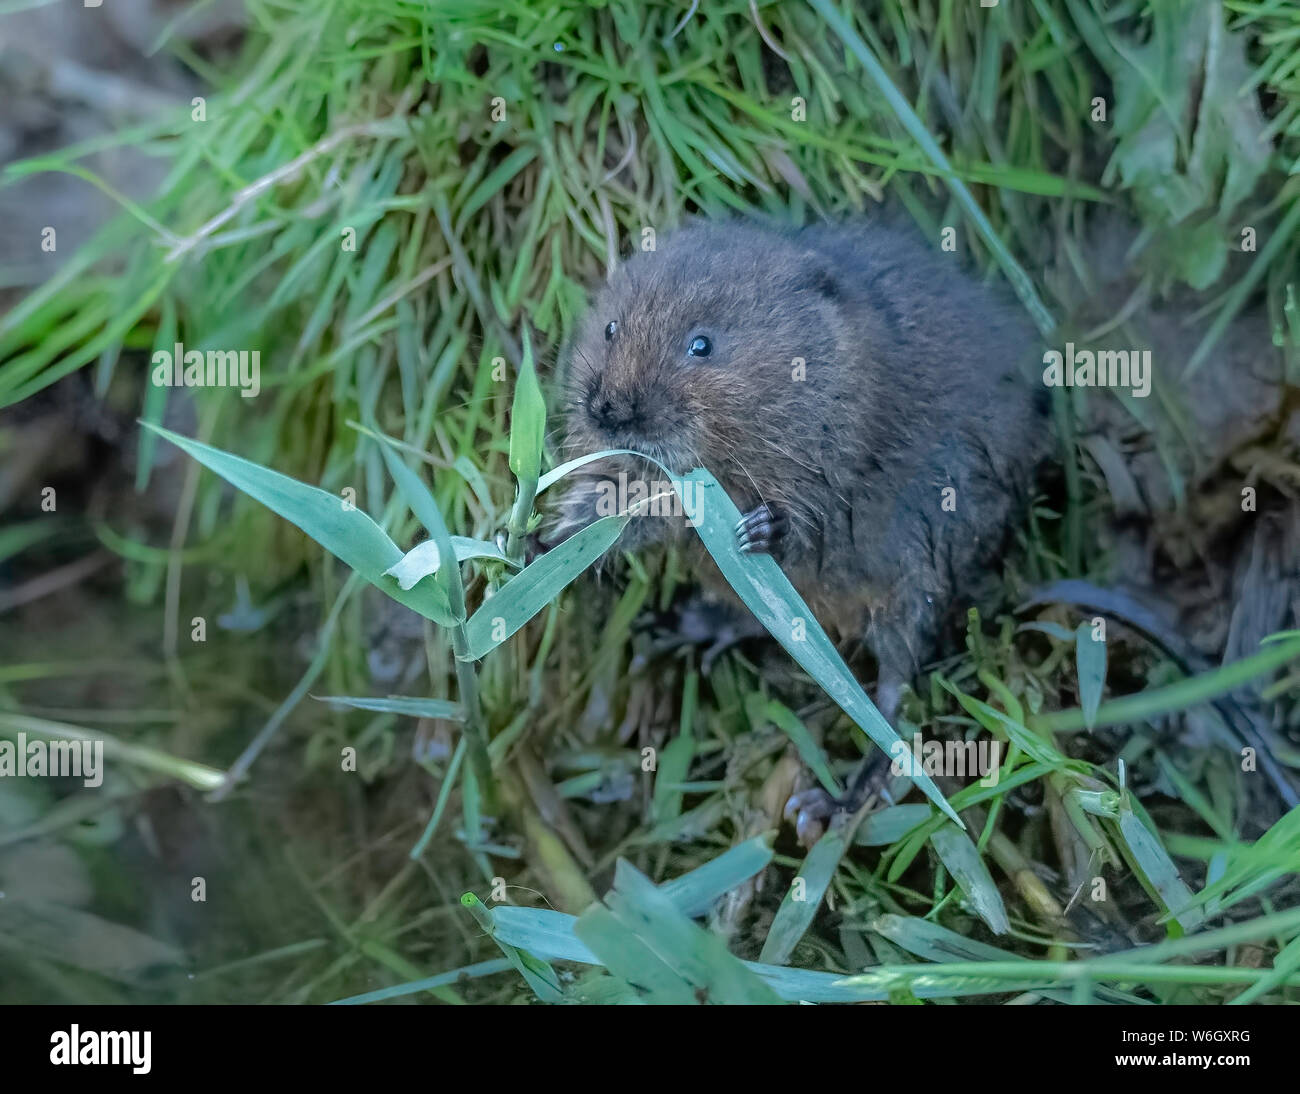 Water Vole eating reeds Stock Photo